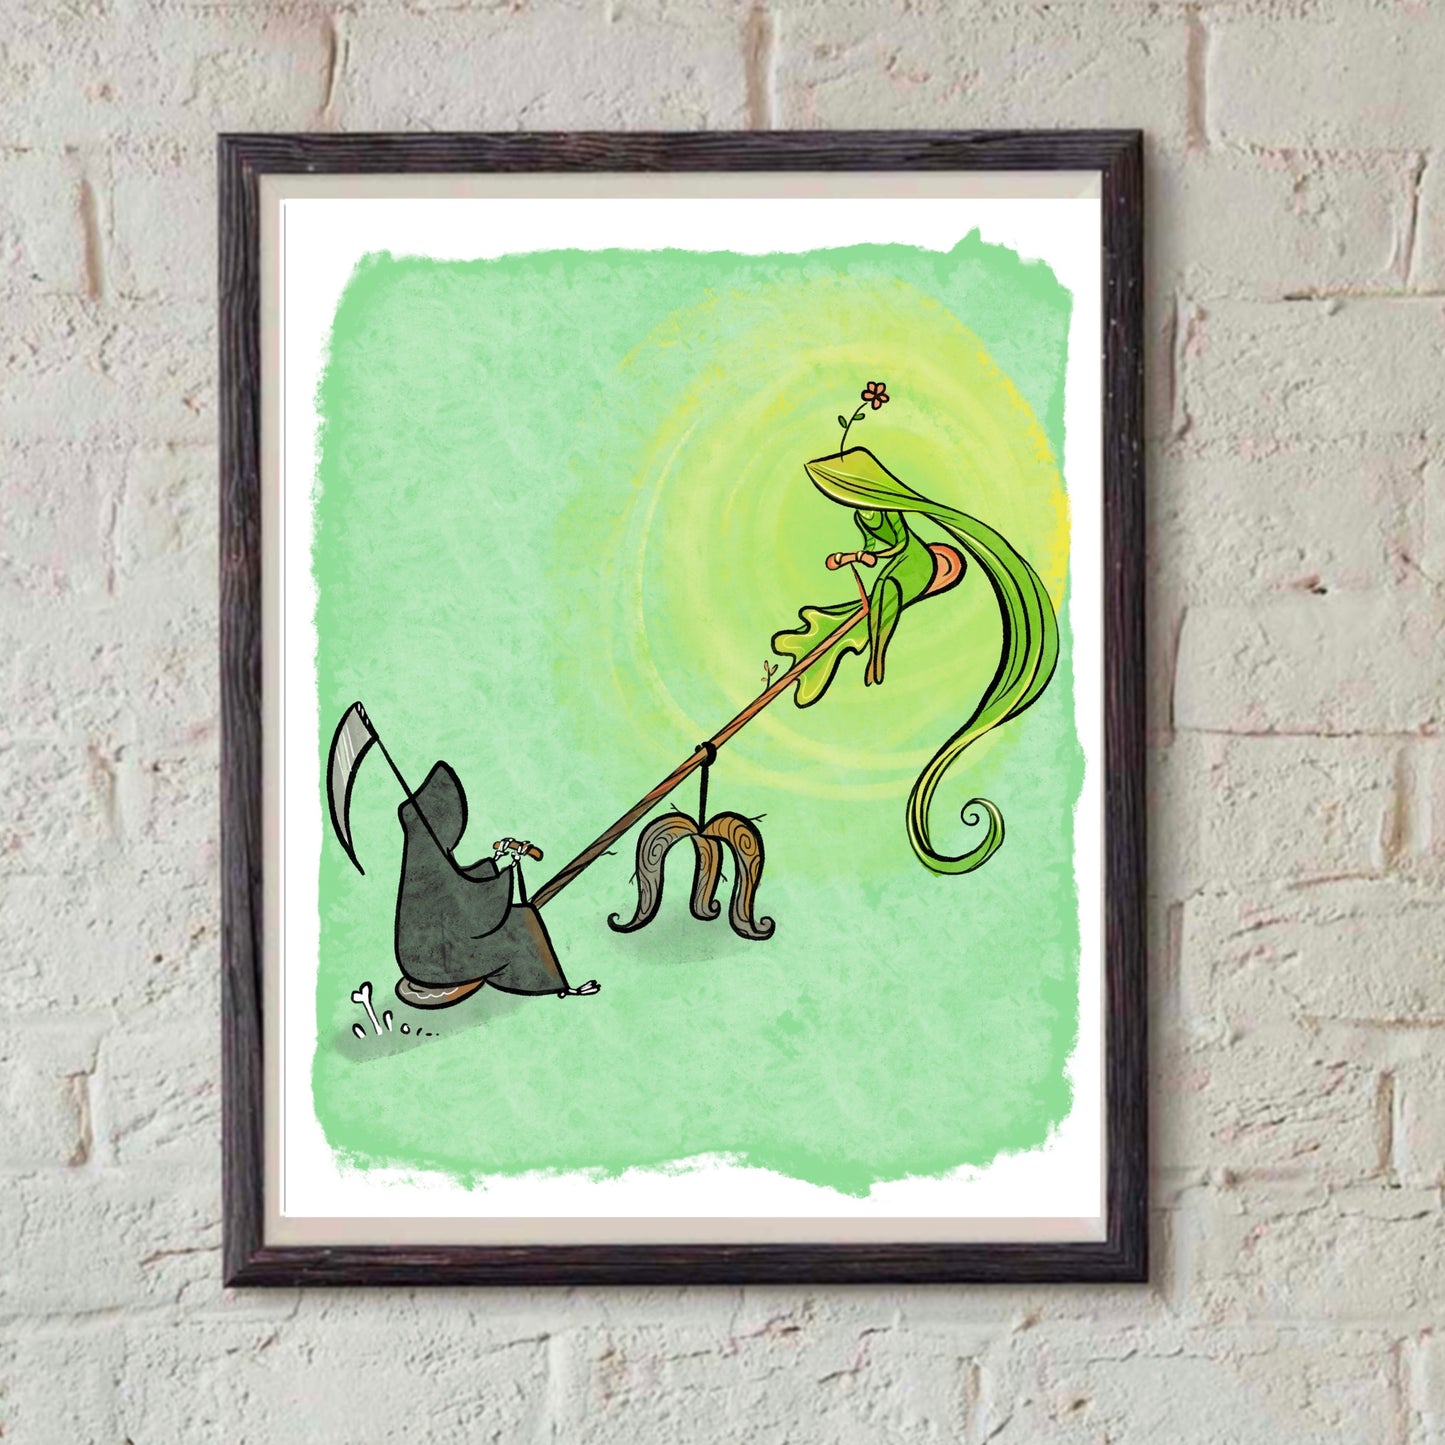 Grim Reaper and Life balance on seesaw -Print